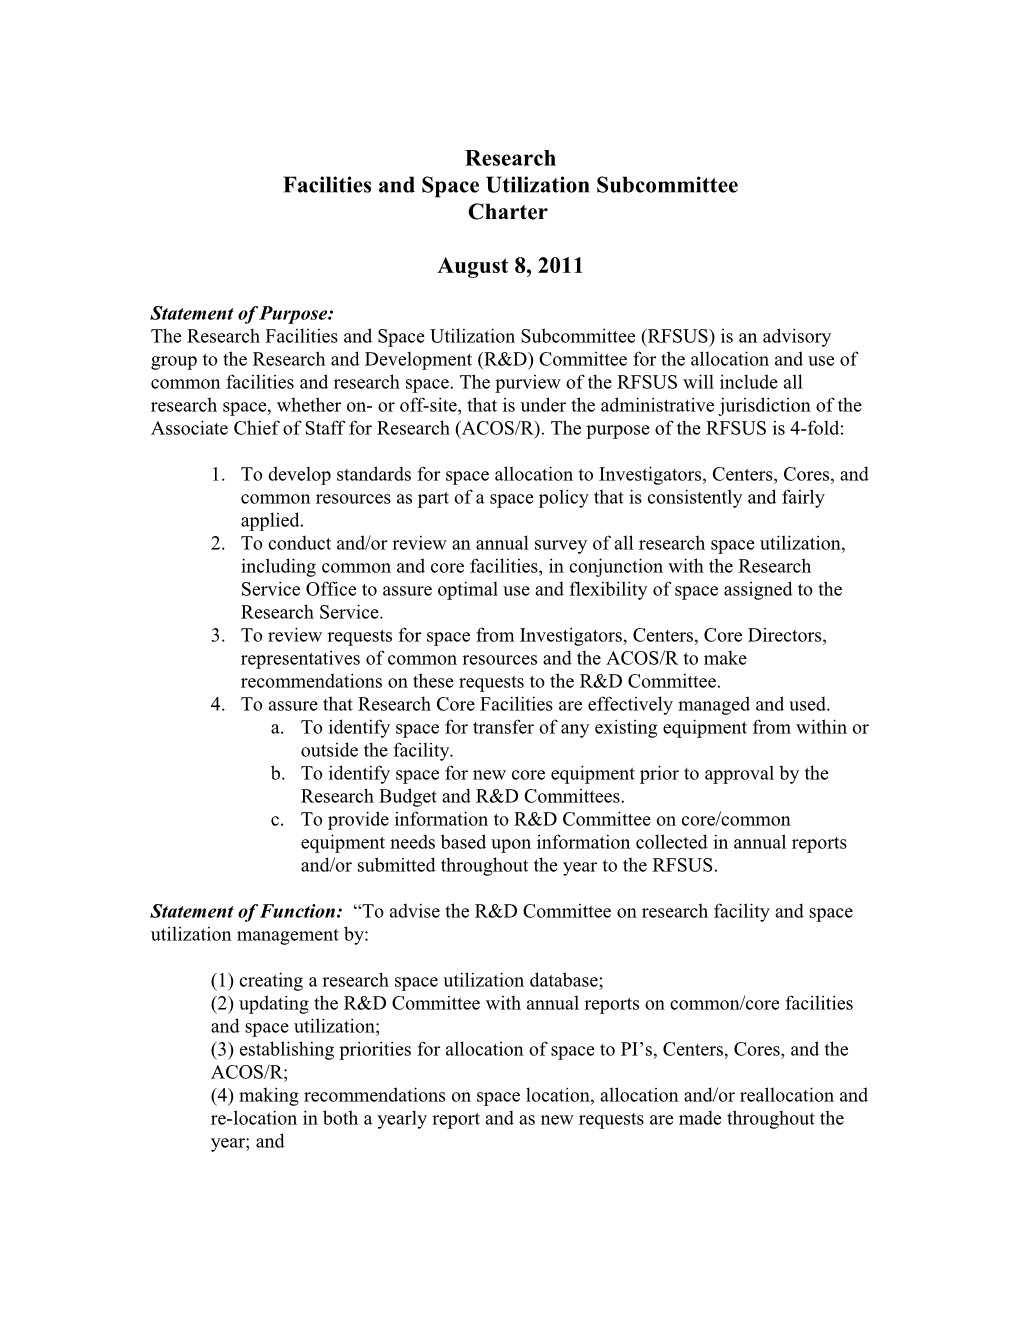 Research Space Utilization Committee Charter Documents